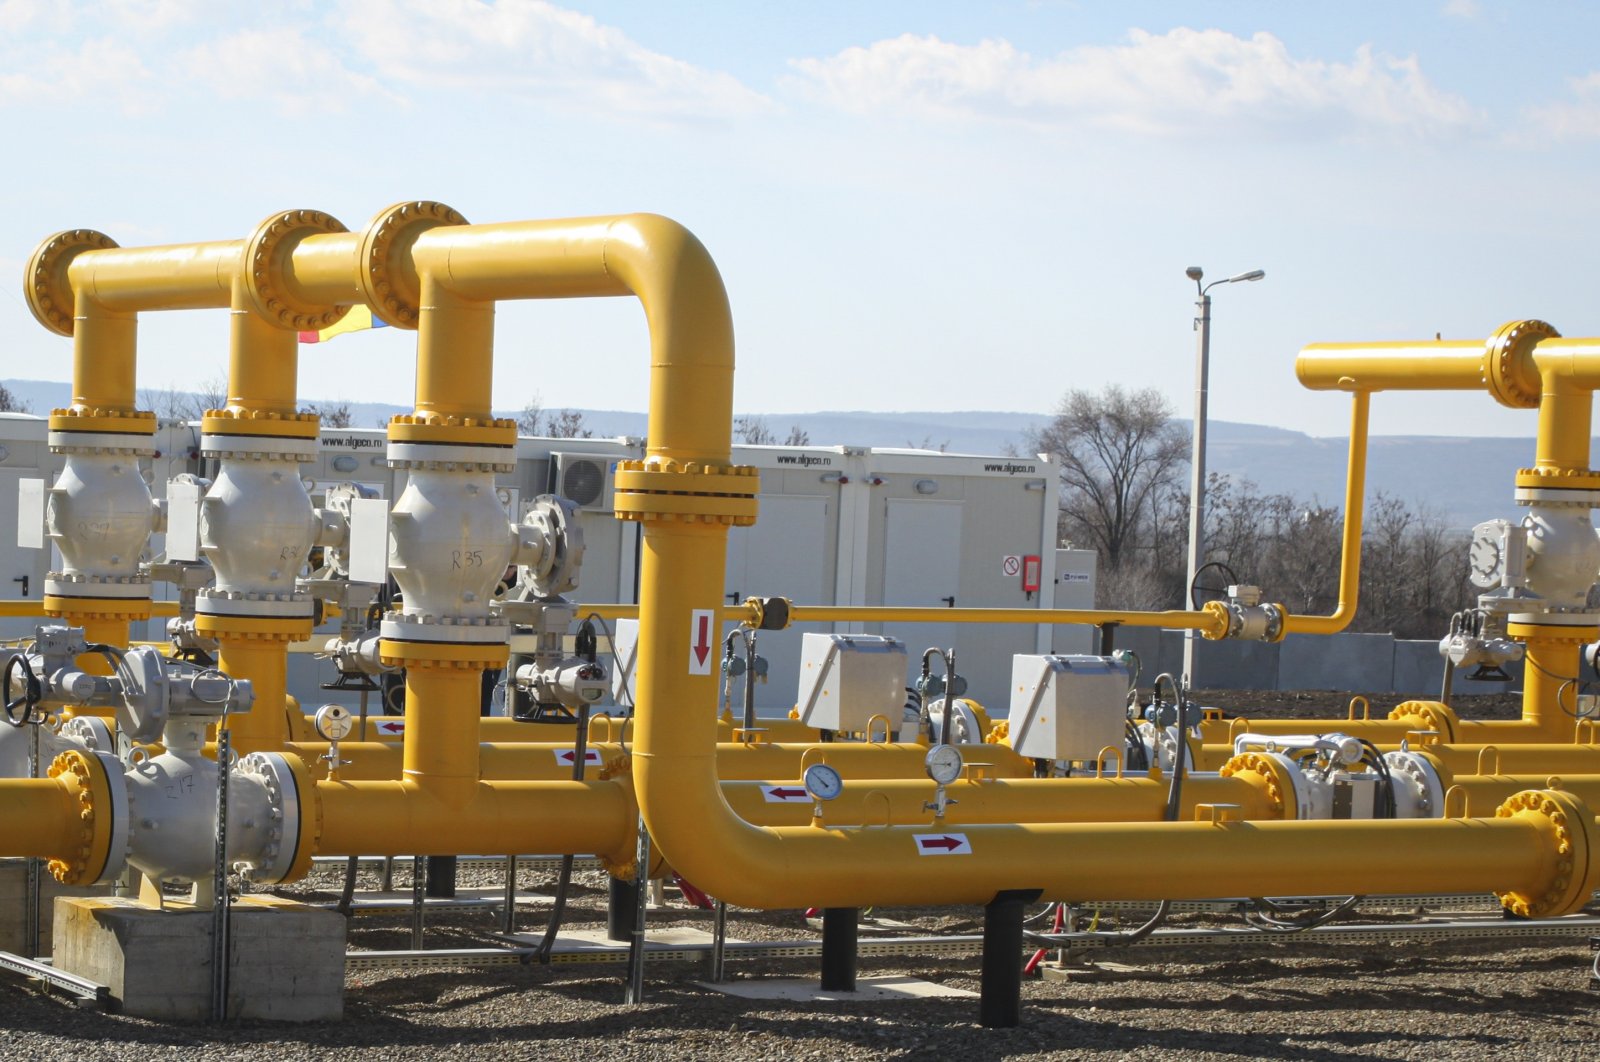 Pipelines of the national natural gas distribution network outside Ungheni, Moldova, March 4, 2015. (AP Photo)